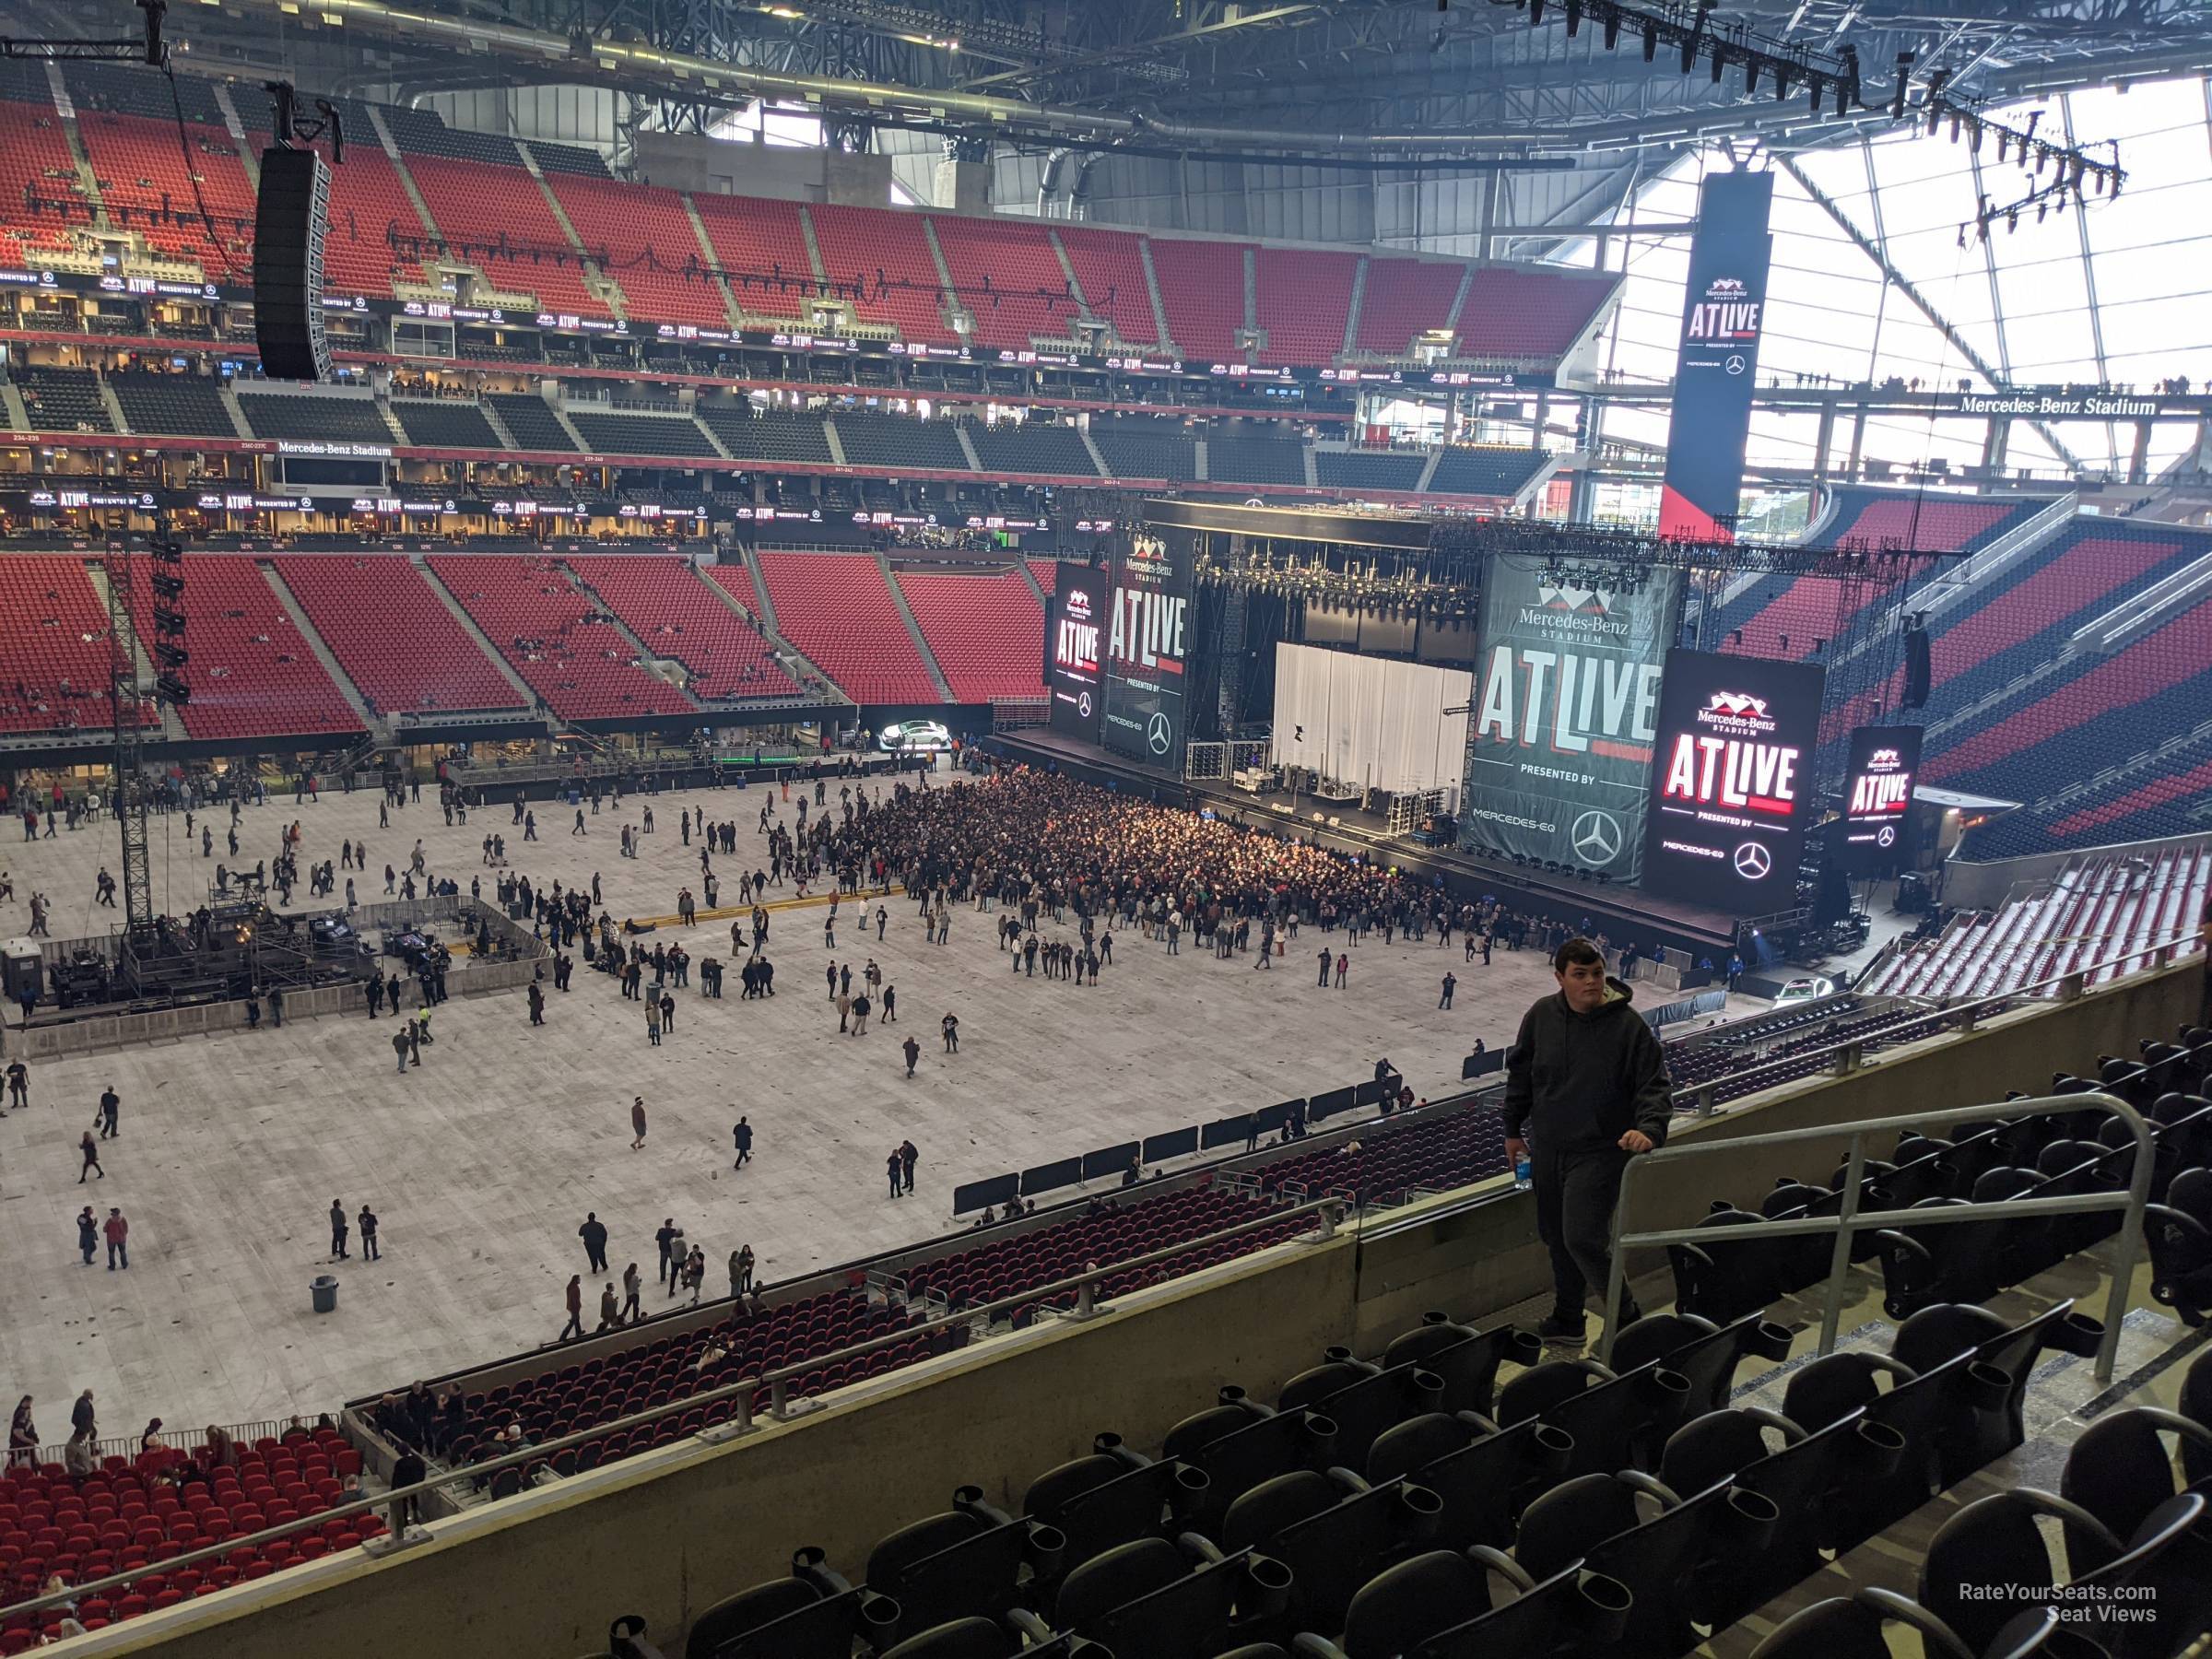 section 215, row 5 seat view  for concert - mercedes-benz stadium